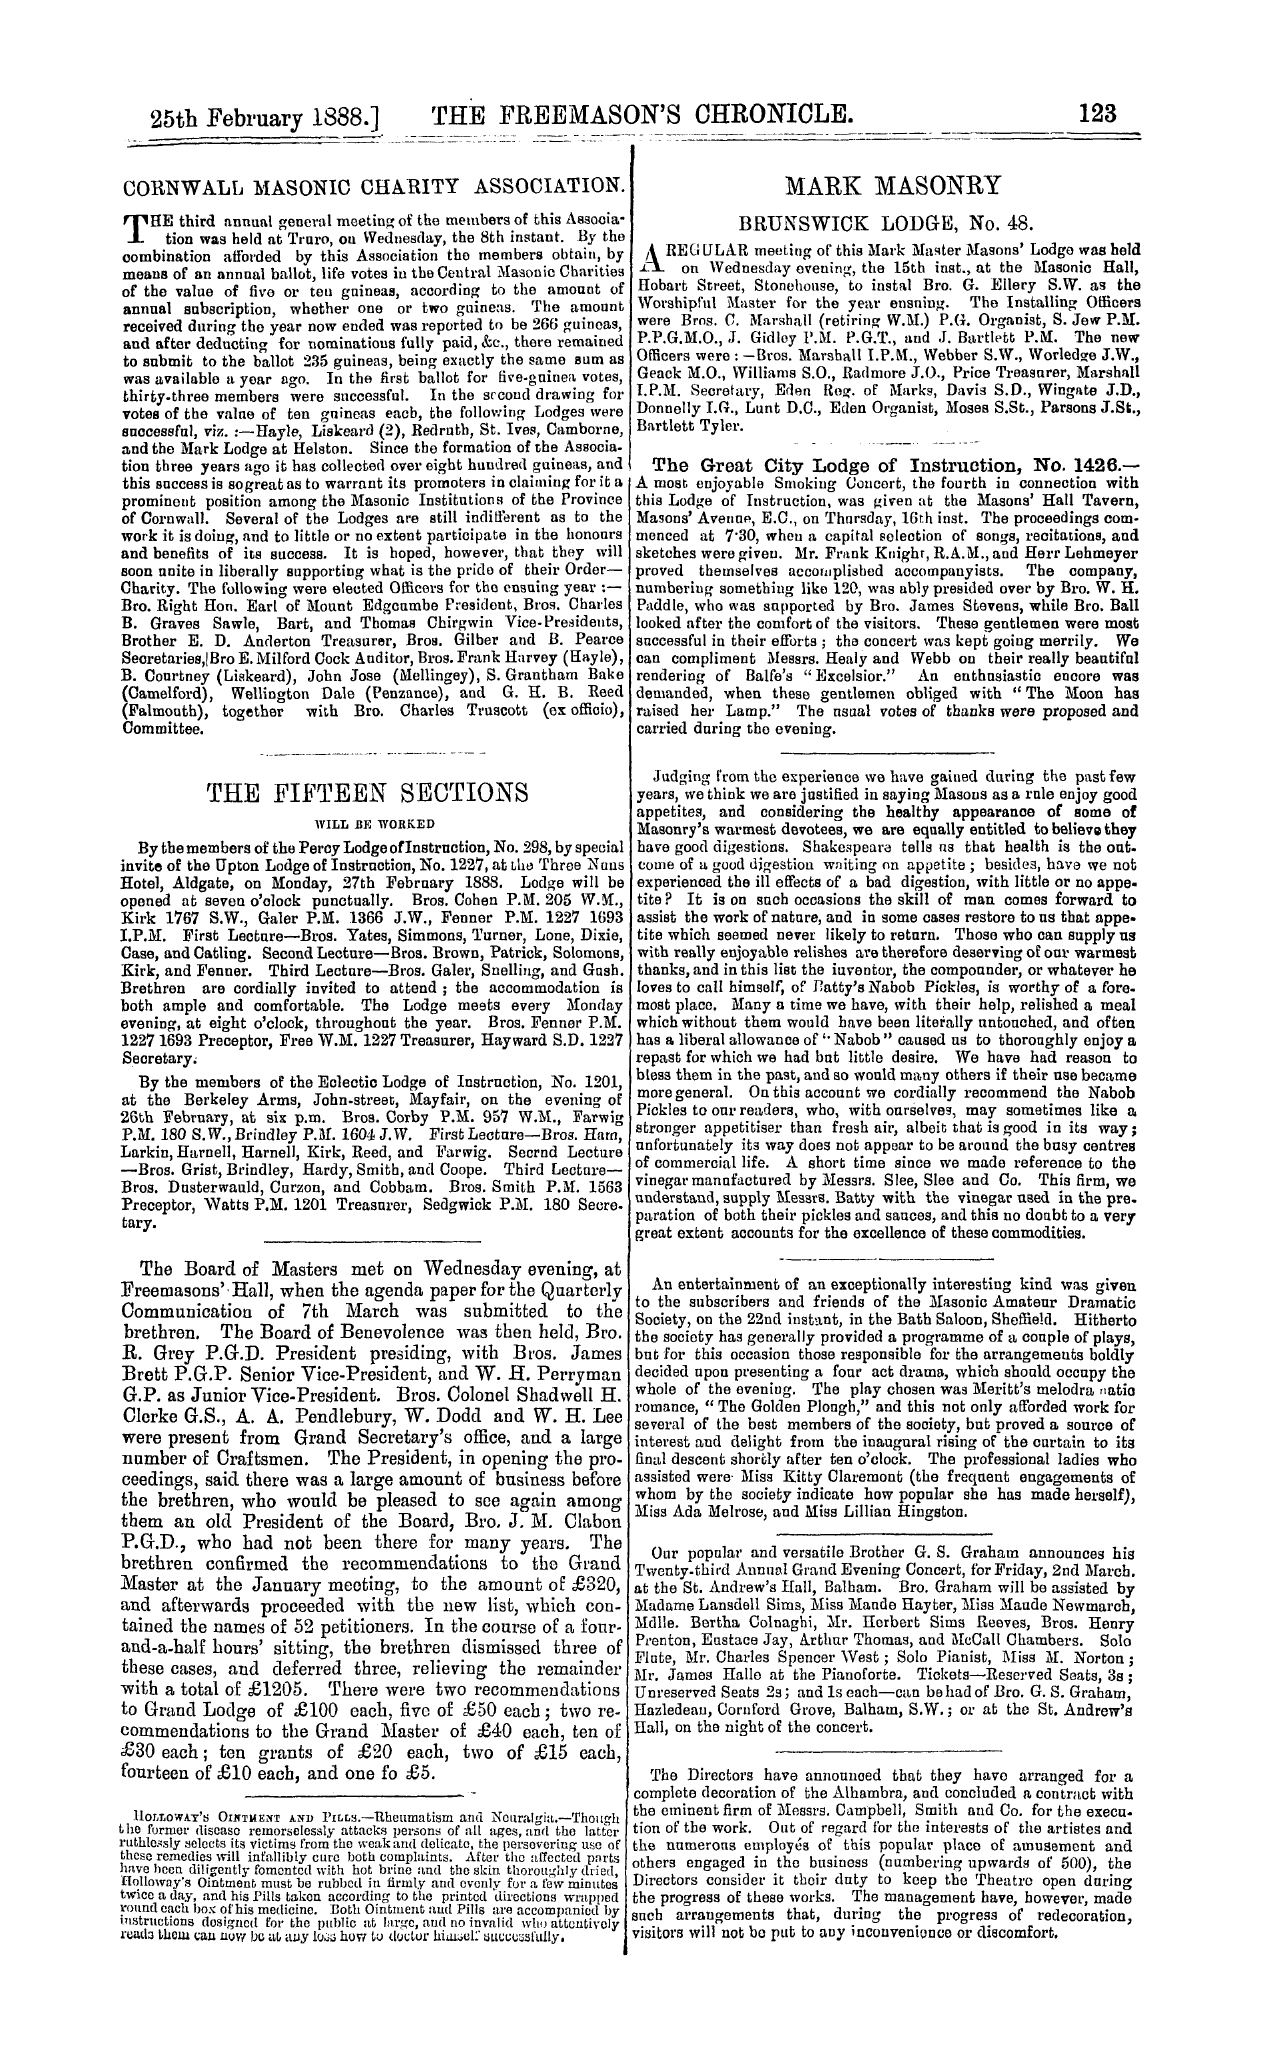 The Freemason's Chronicle: 1888-02-25 - The Fifteen Sections